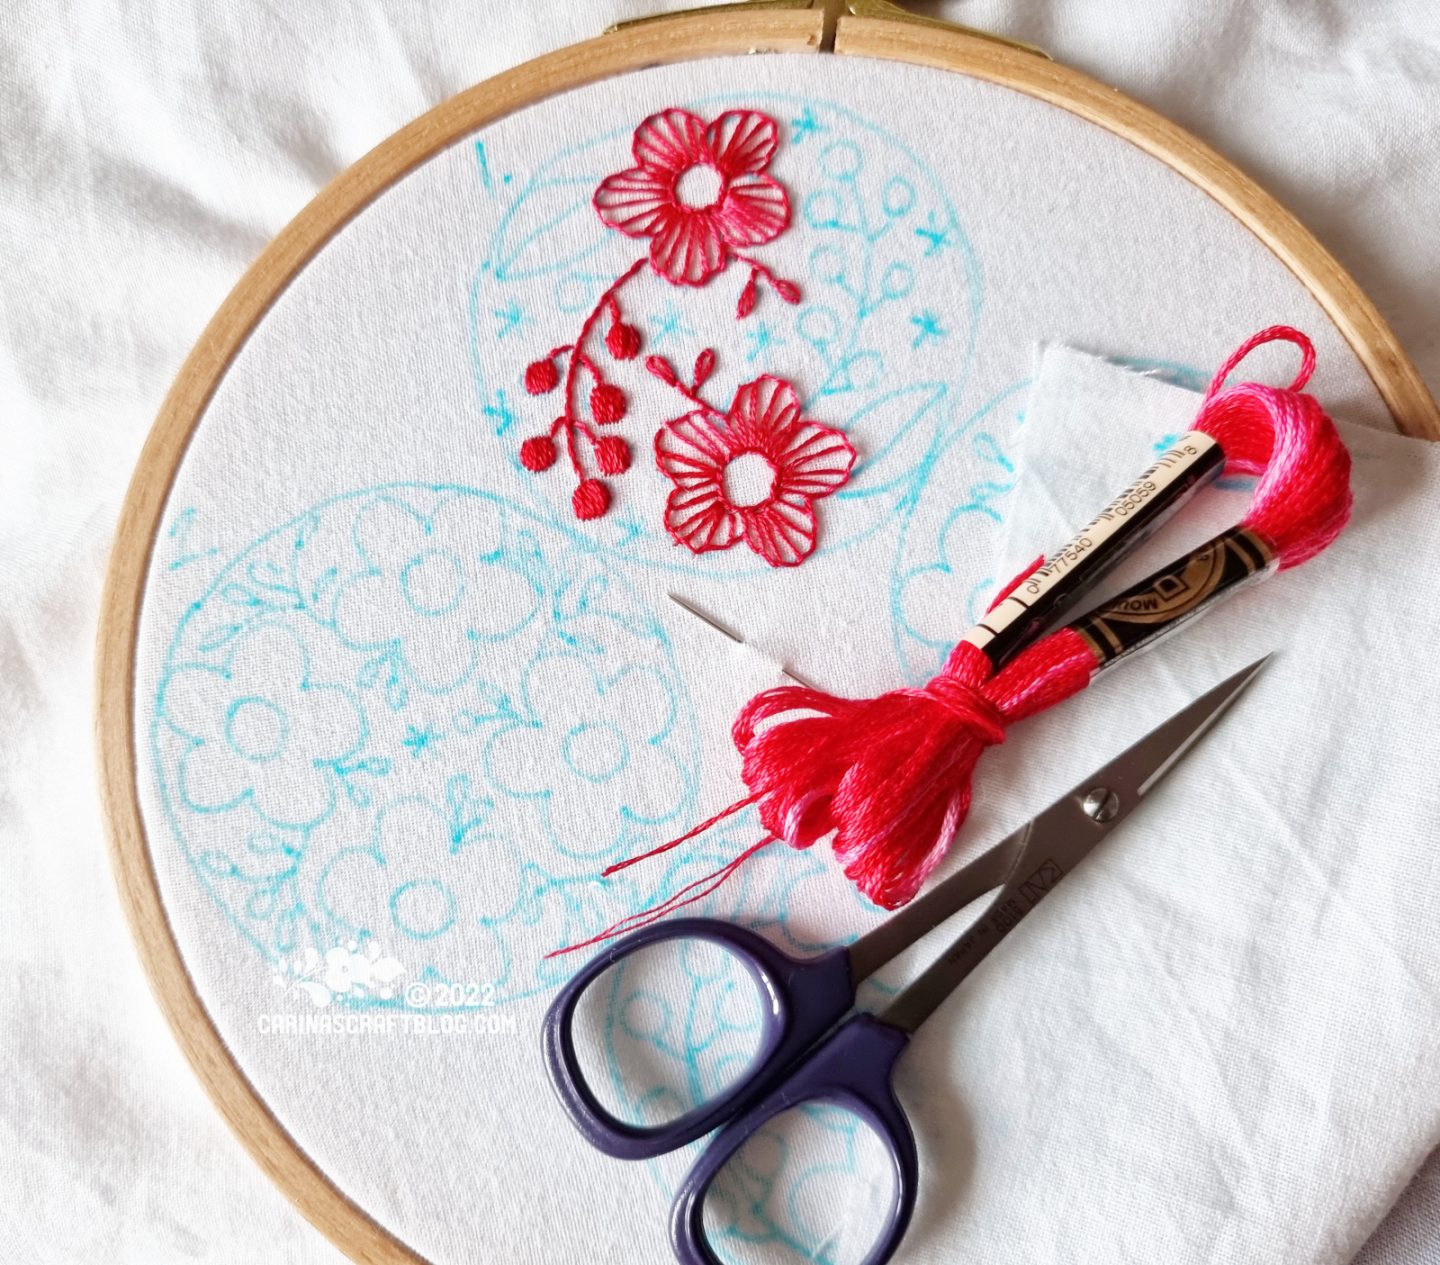 Over head view of embroidery hoop with white fabric. On the fabric is drawn two circles with flower and star motifs. One circle motif is partially stitched with dark pink thread.